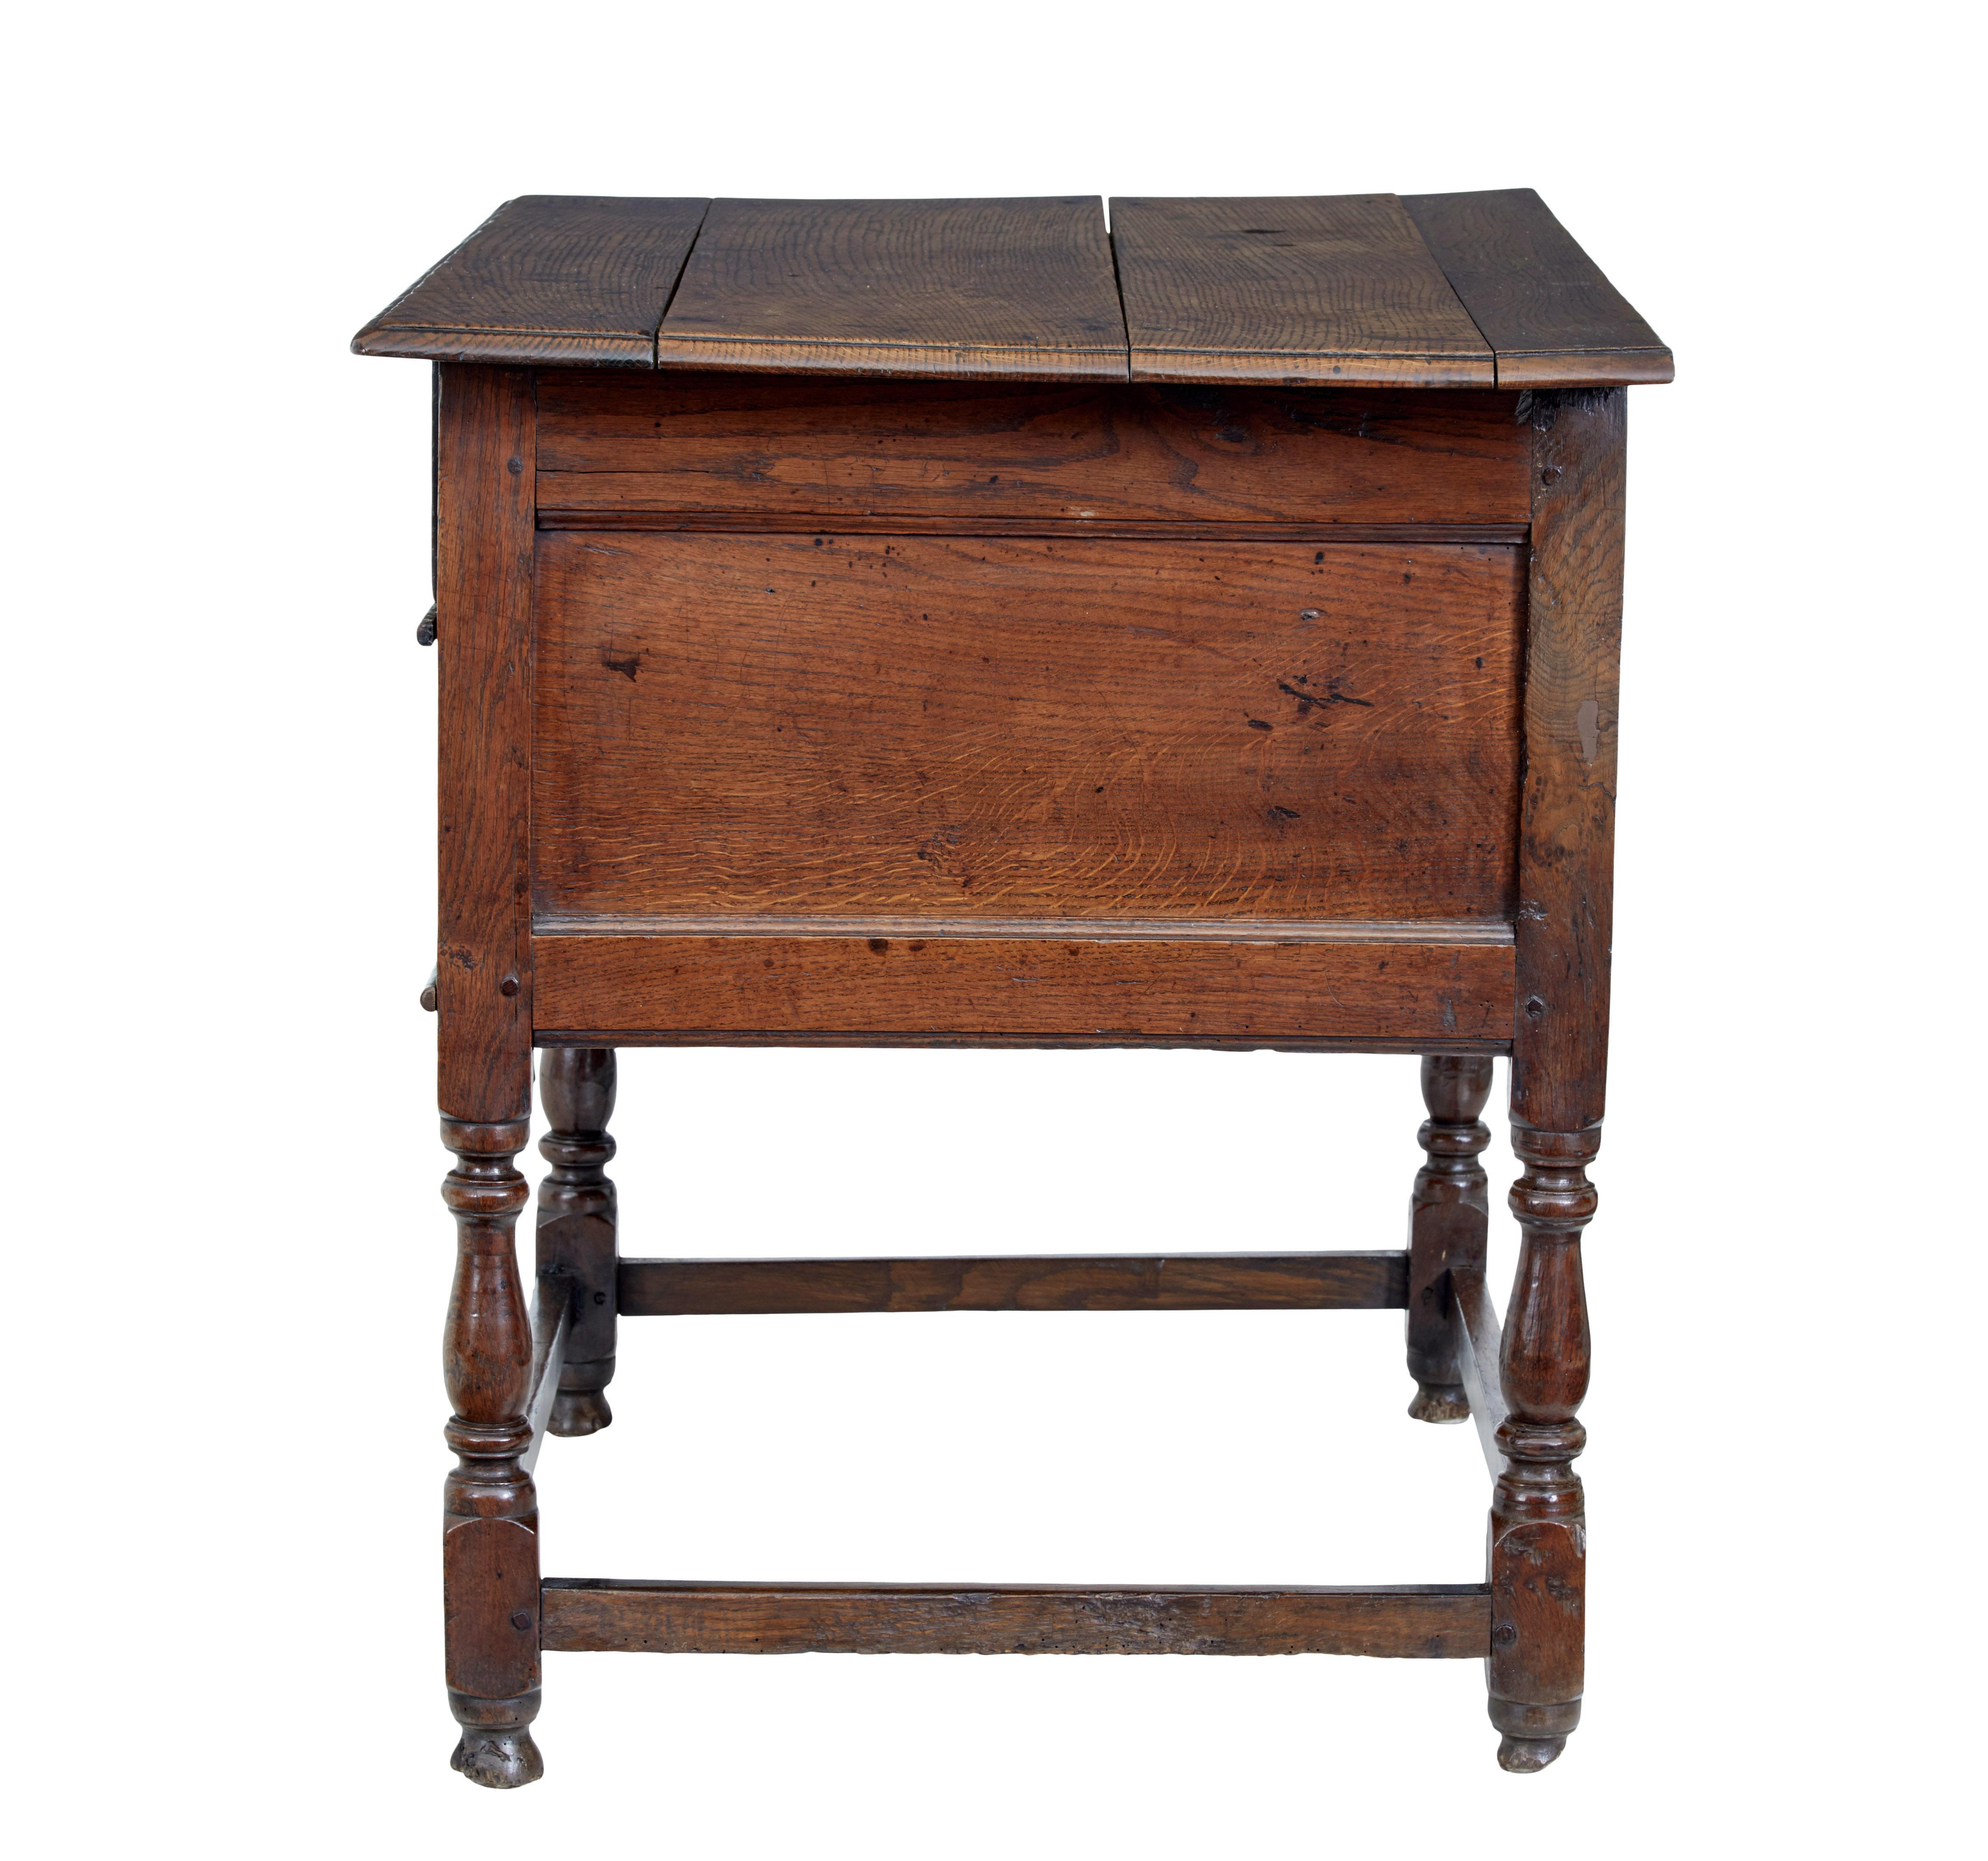 Hand-Crafted Early 18th Century English 2 Drawer Oak Side Table